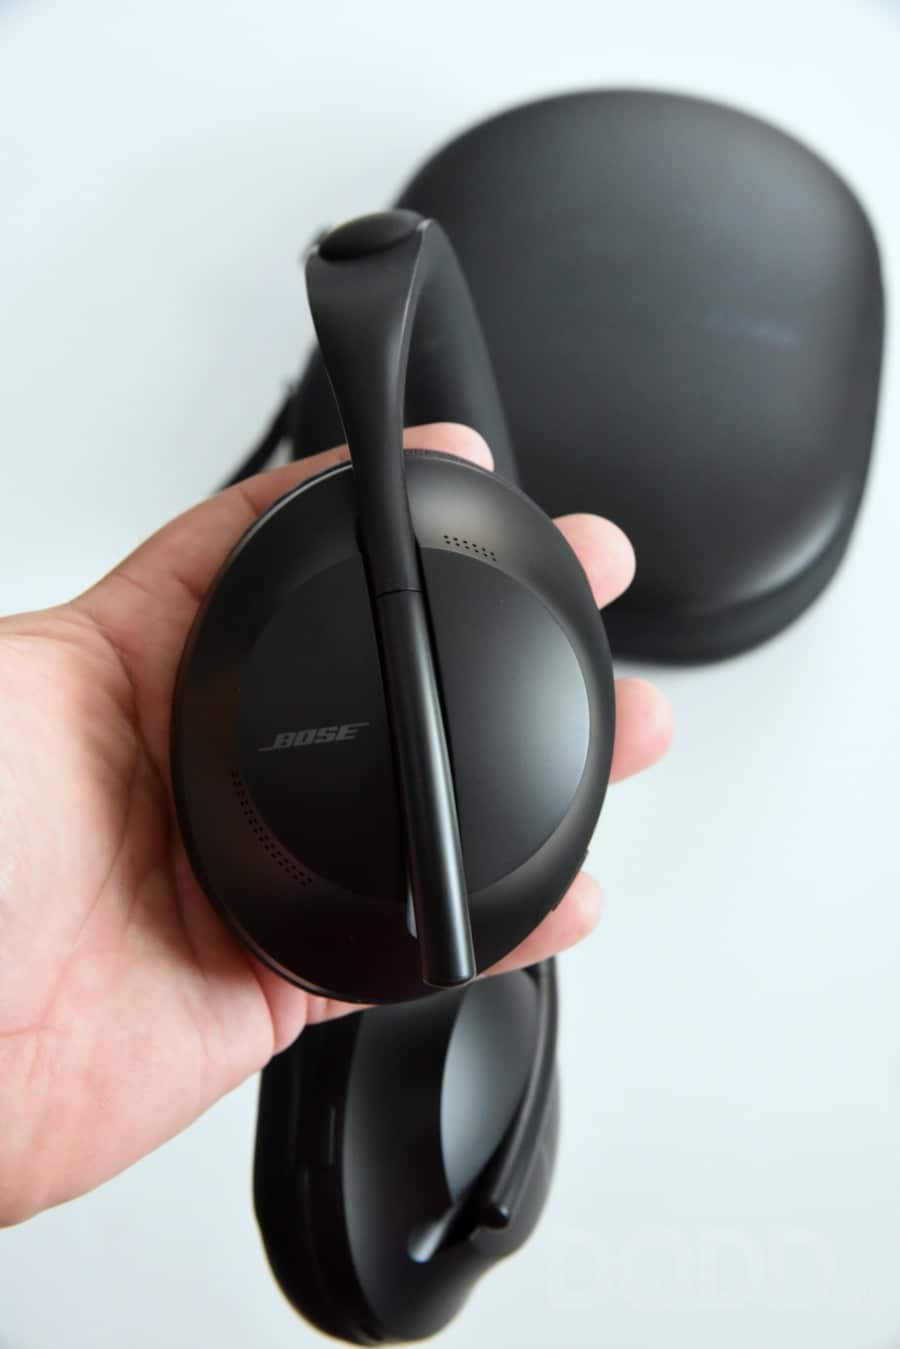 Bose Noise Cancelling Headphones, Opinion: The Bose 700 Noise Cancelling Headphones are the Best, Days of a Domestic Dad